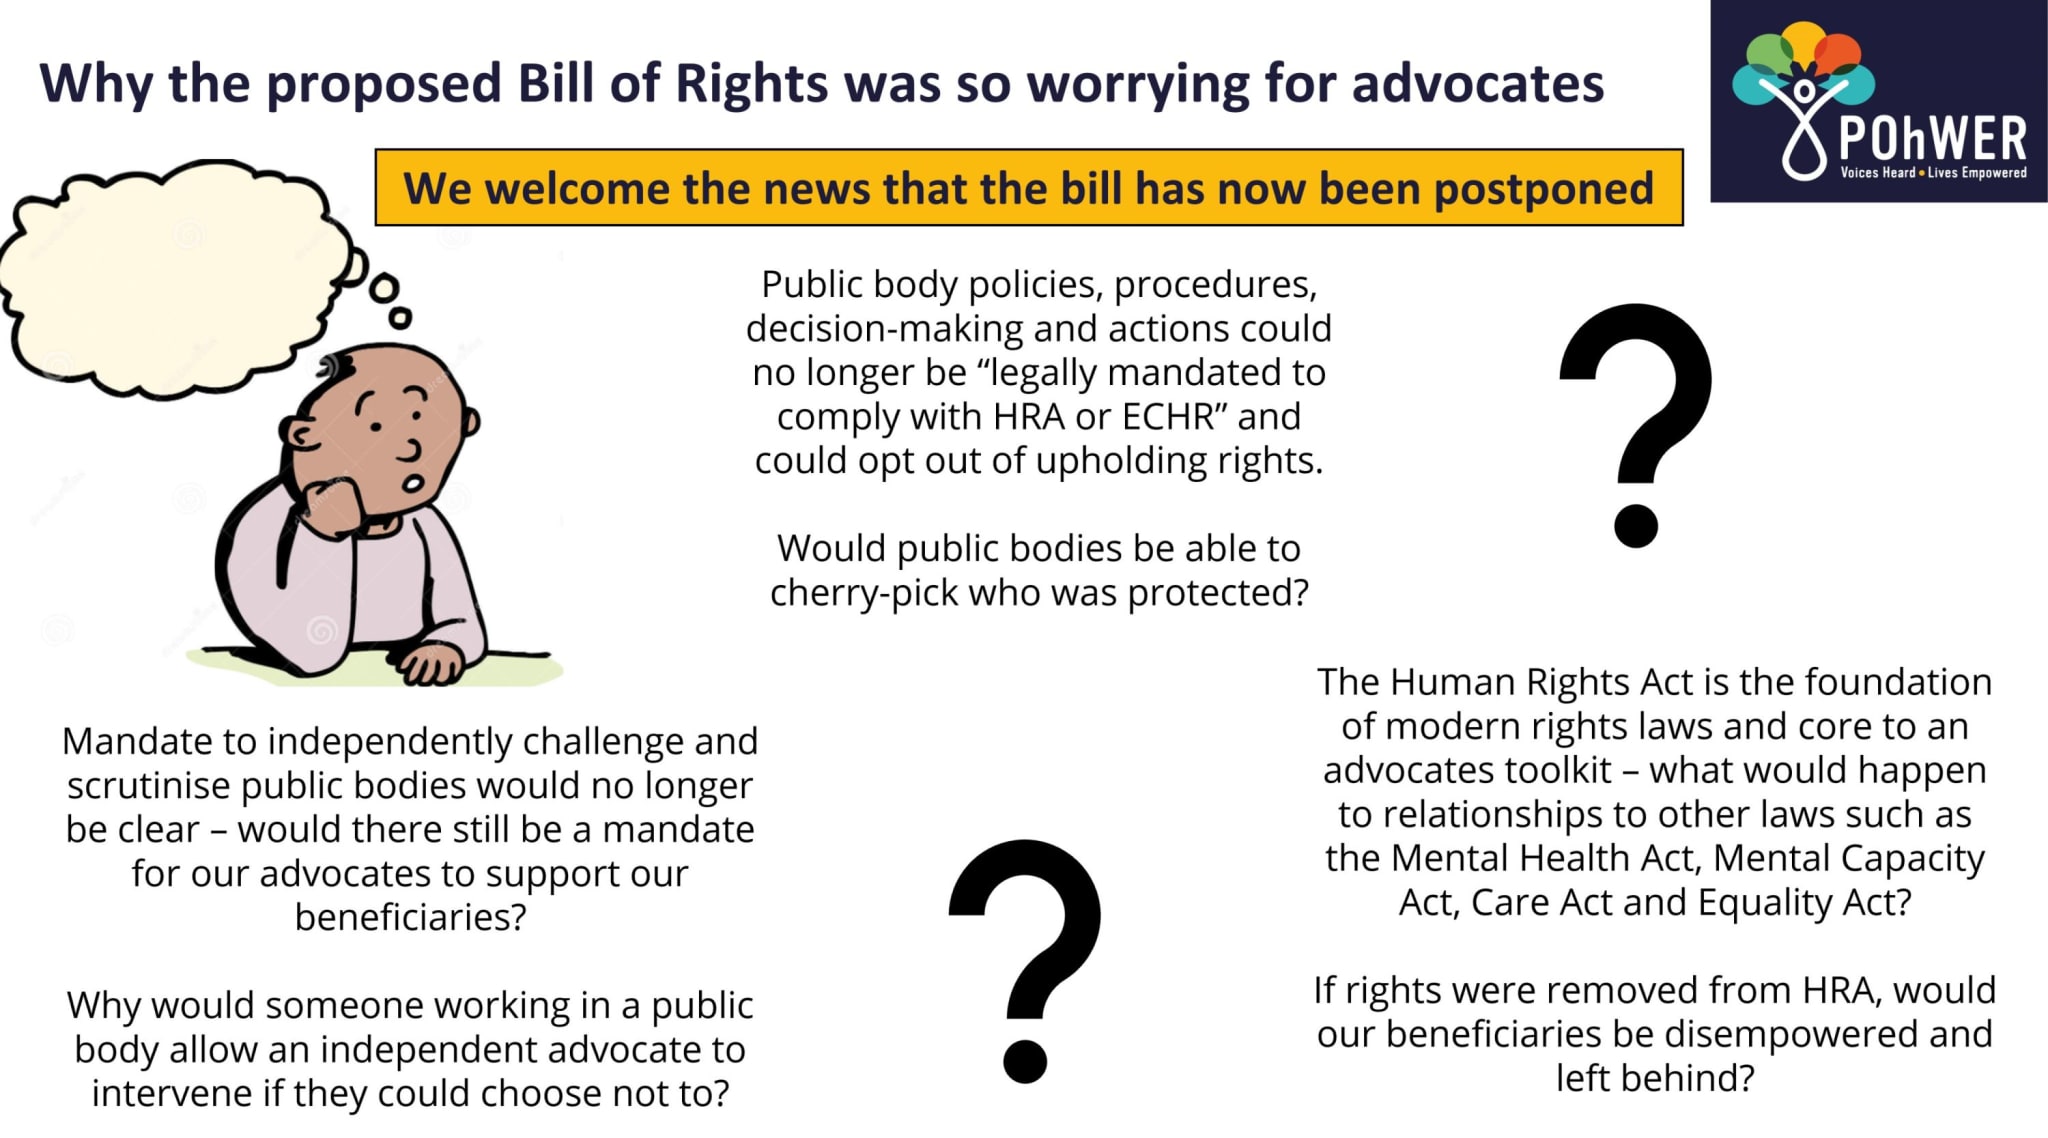 A summary of why the proposed Bill of Rights was so worrying for advocates